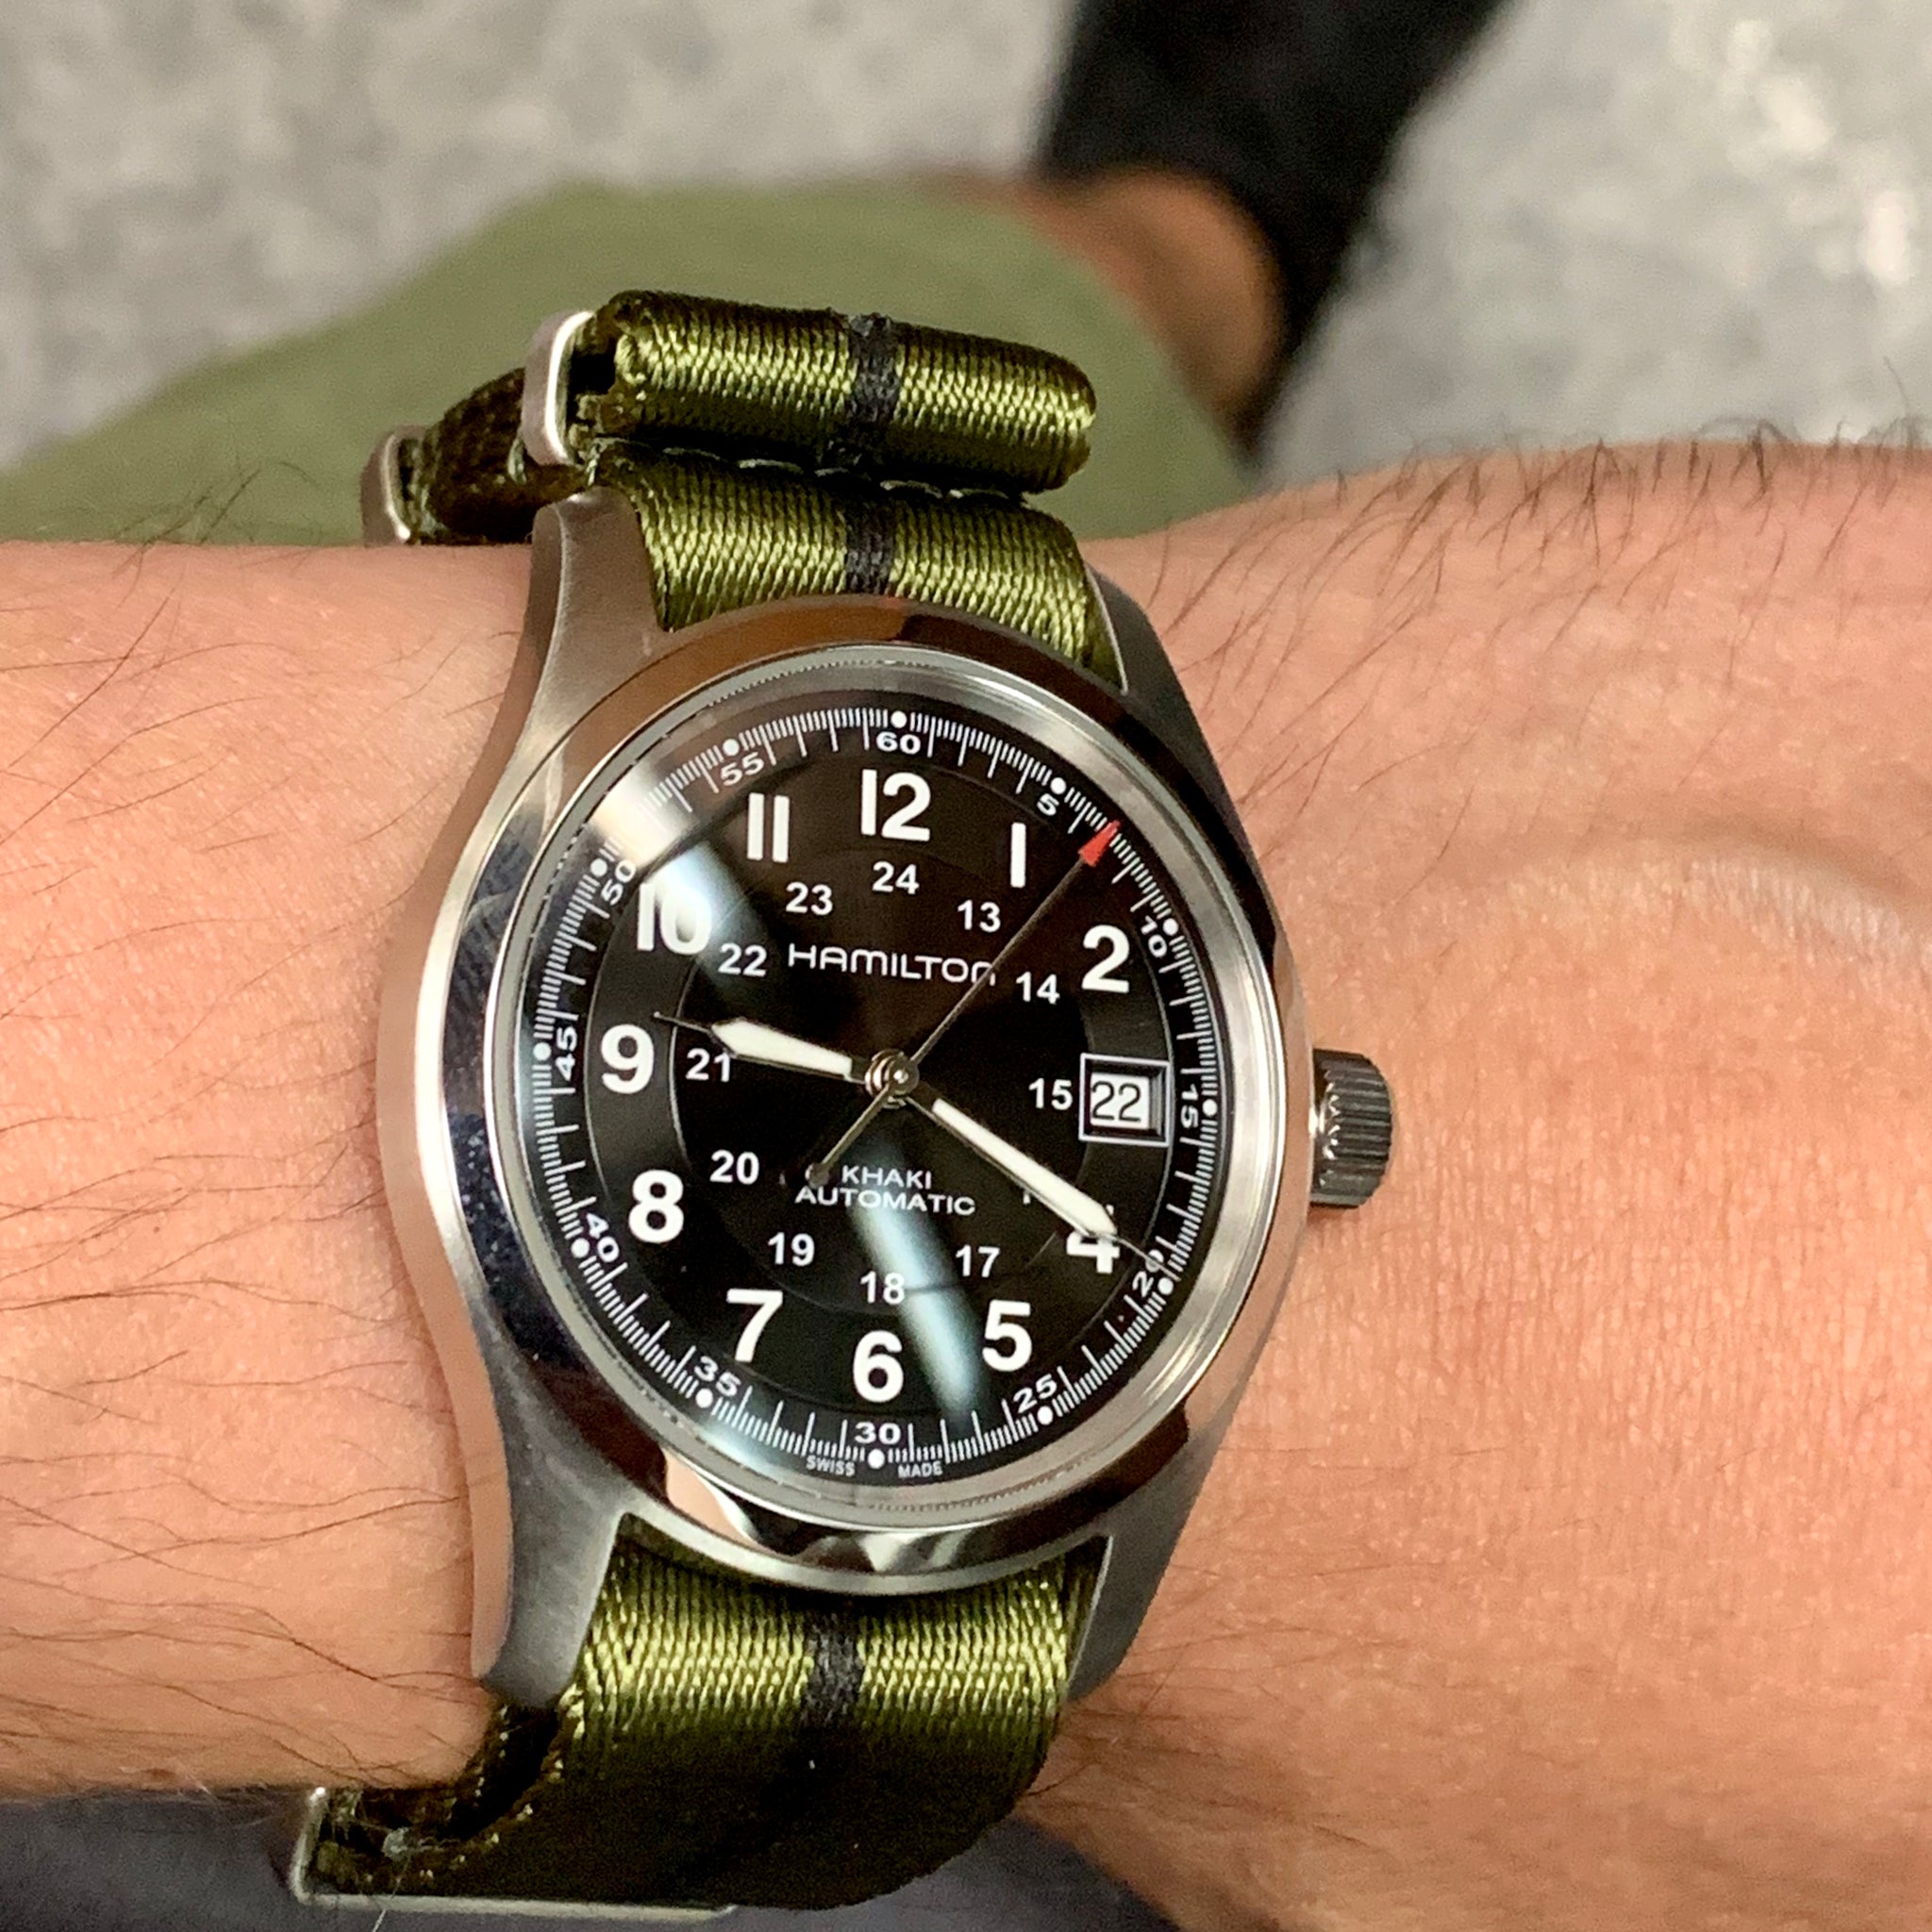 How to fit and wear a NATO Strap